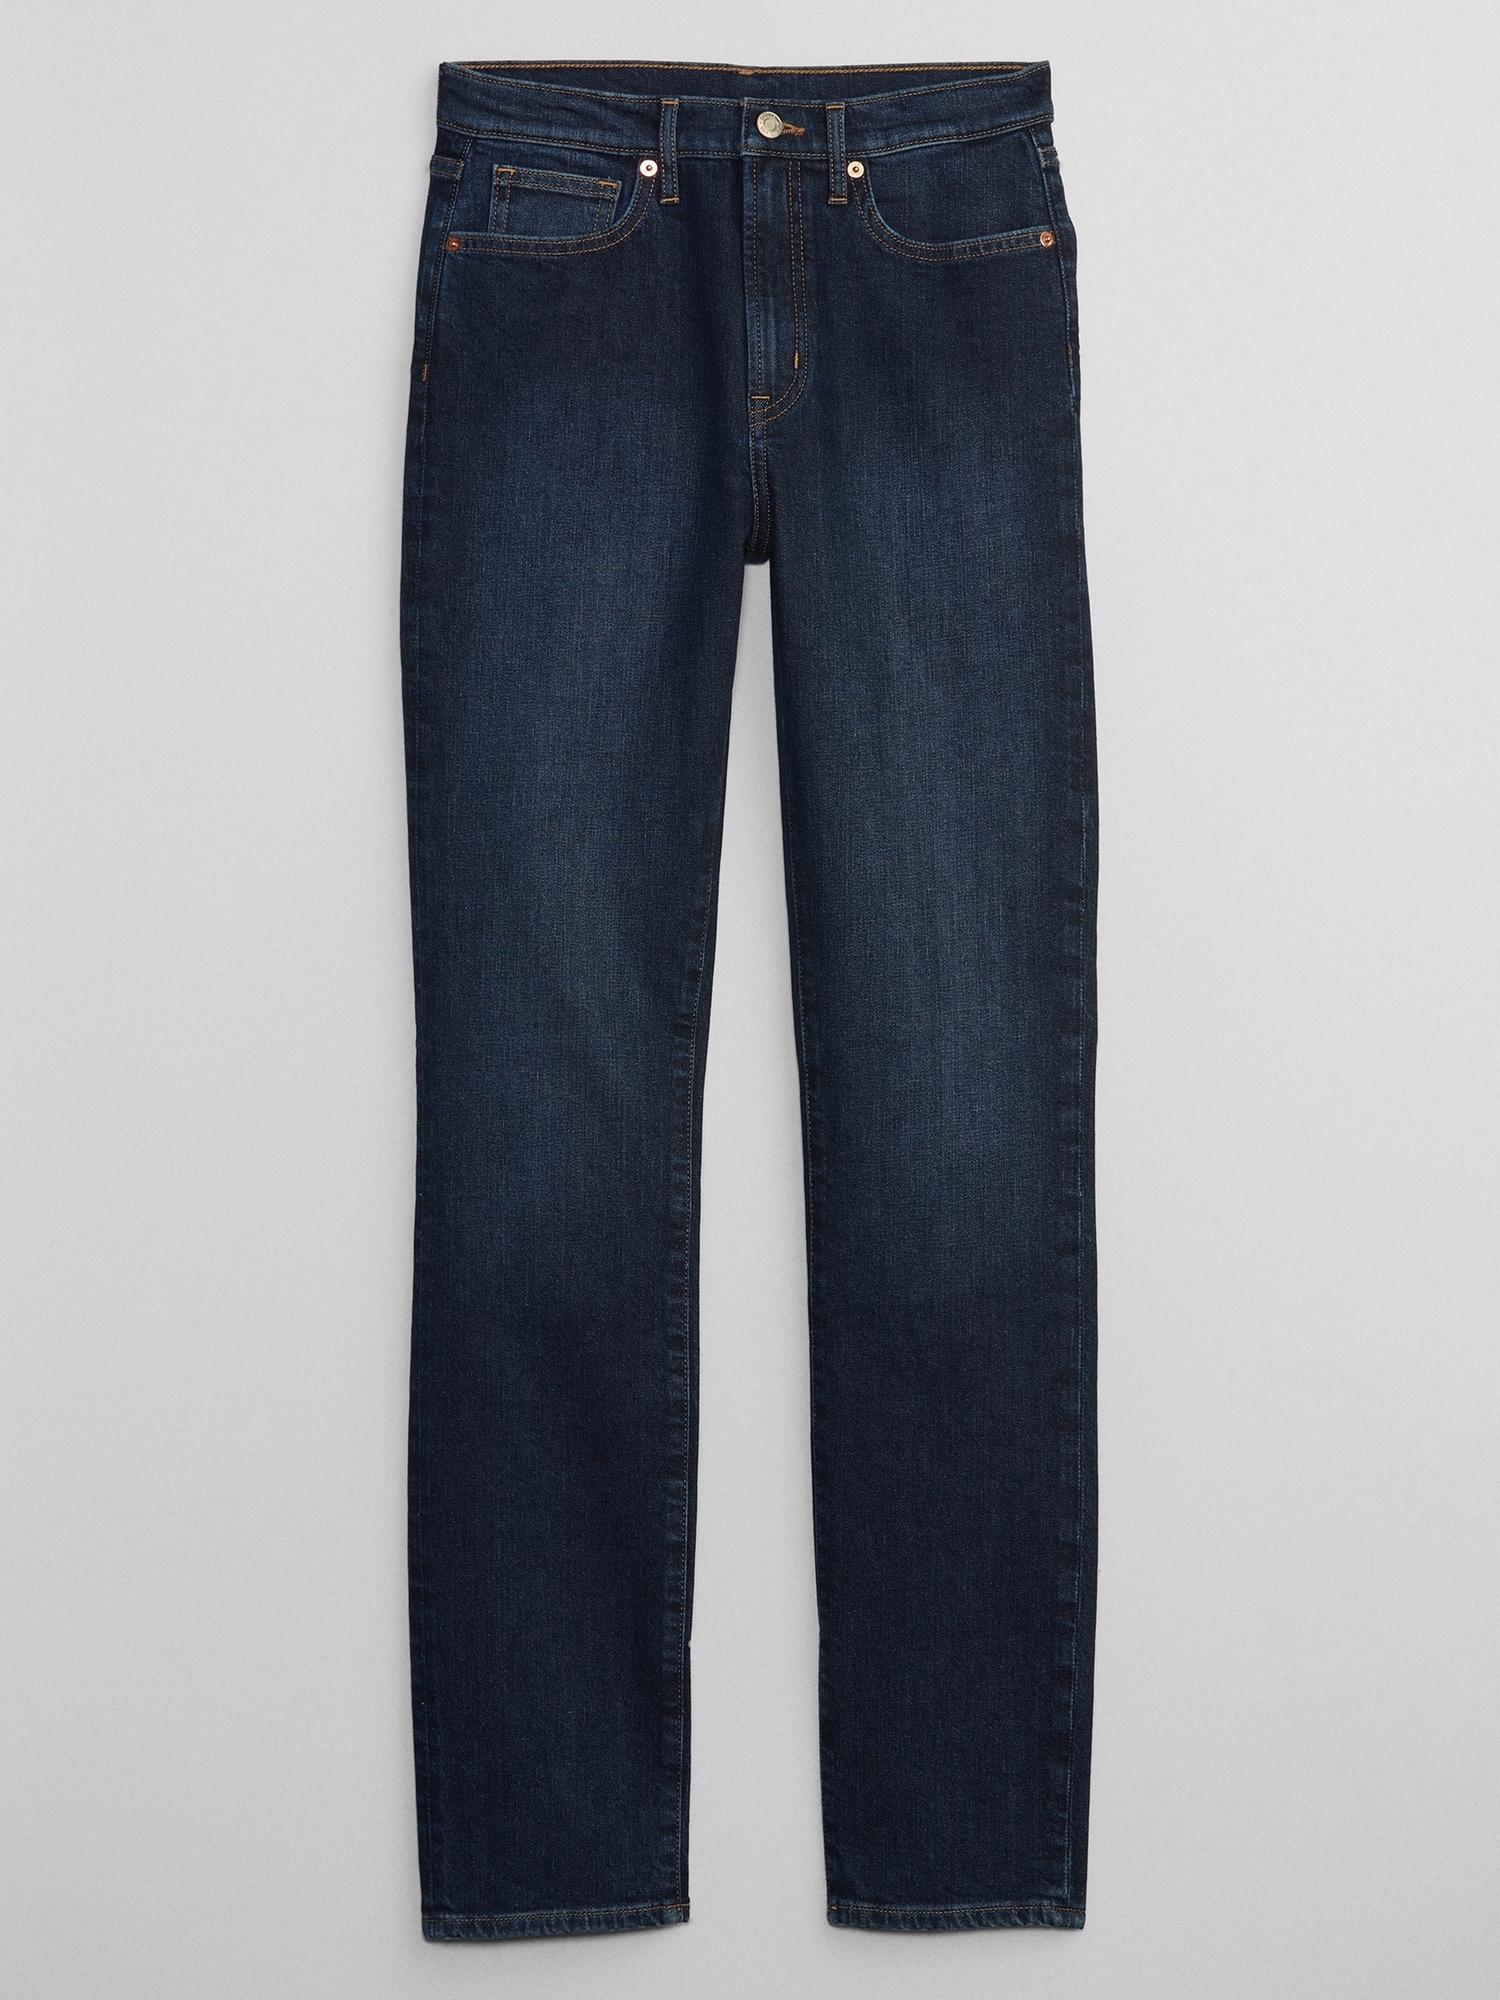 High Rise Vintage Slim Jeans with Washwell | Gap Factory